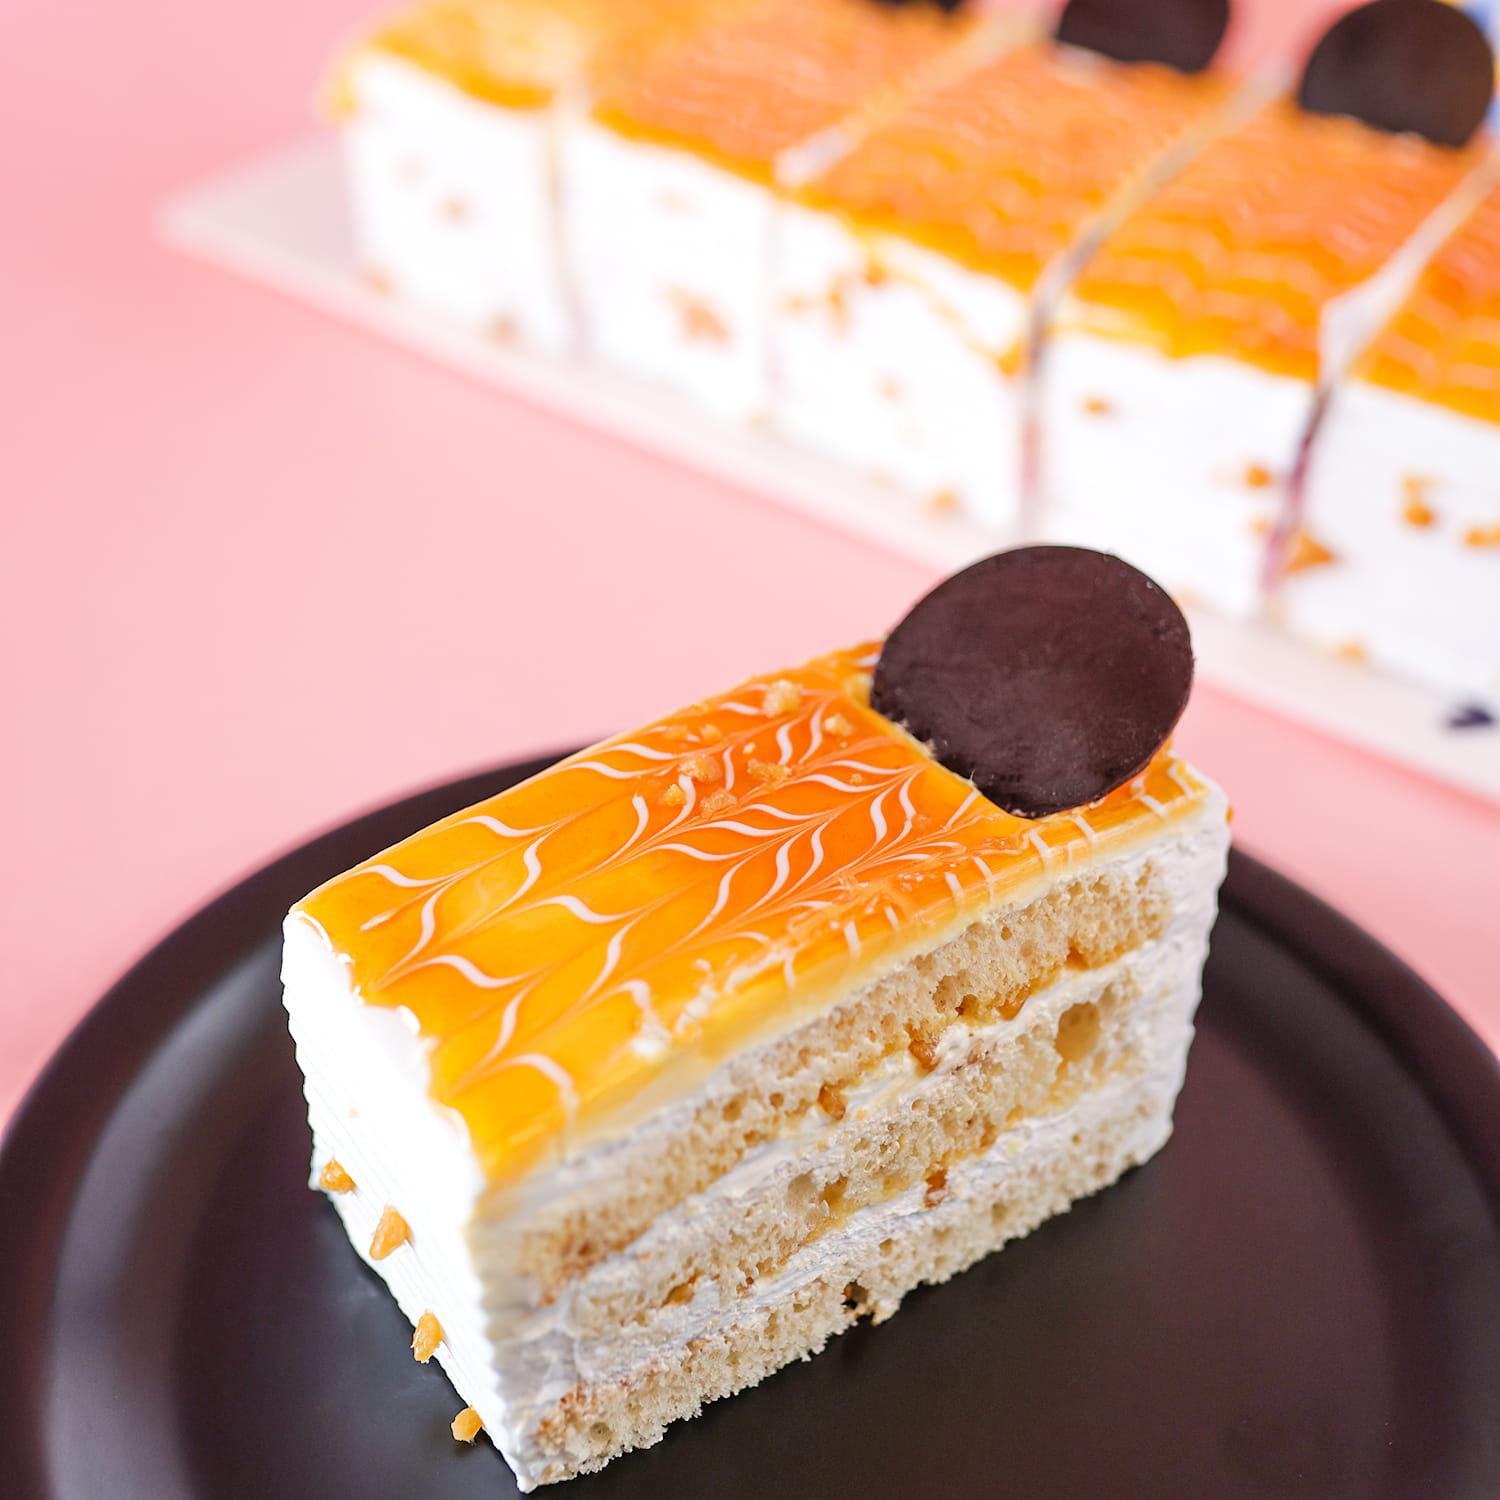 Online sweetshop with cake and dessert delivery | Frutiko.cz